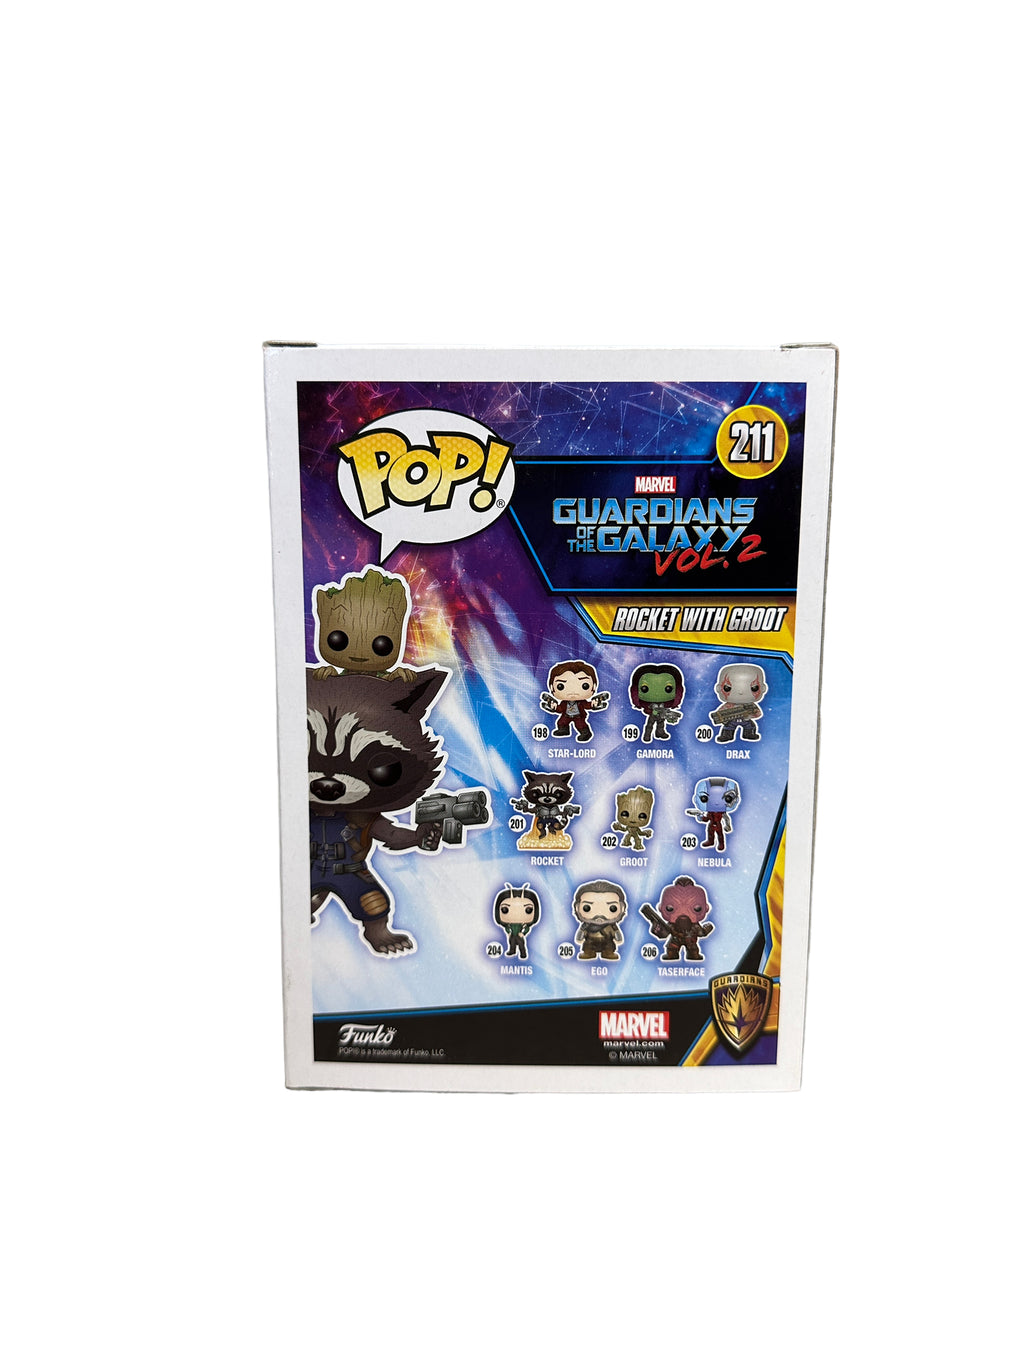 Funko Pop! Marvel Guardian of the Galaxy Vol. 2 Rocket with Groot Collector  Corps Exclusive Bobble-Head #211